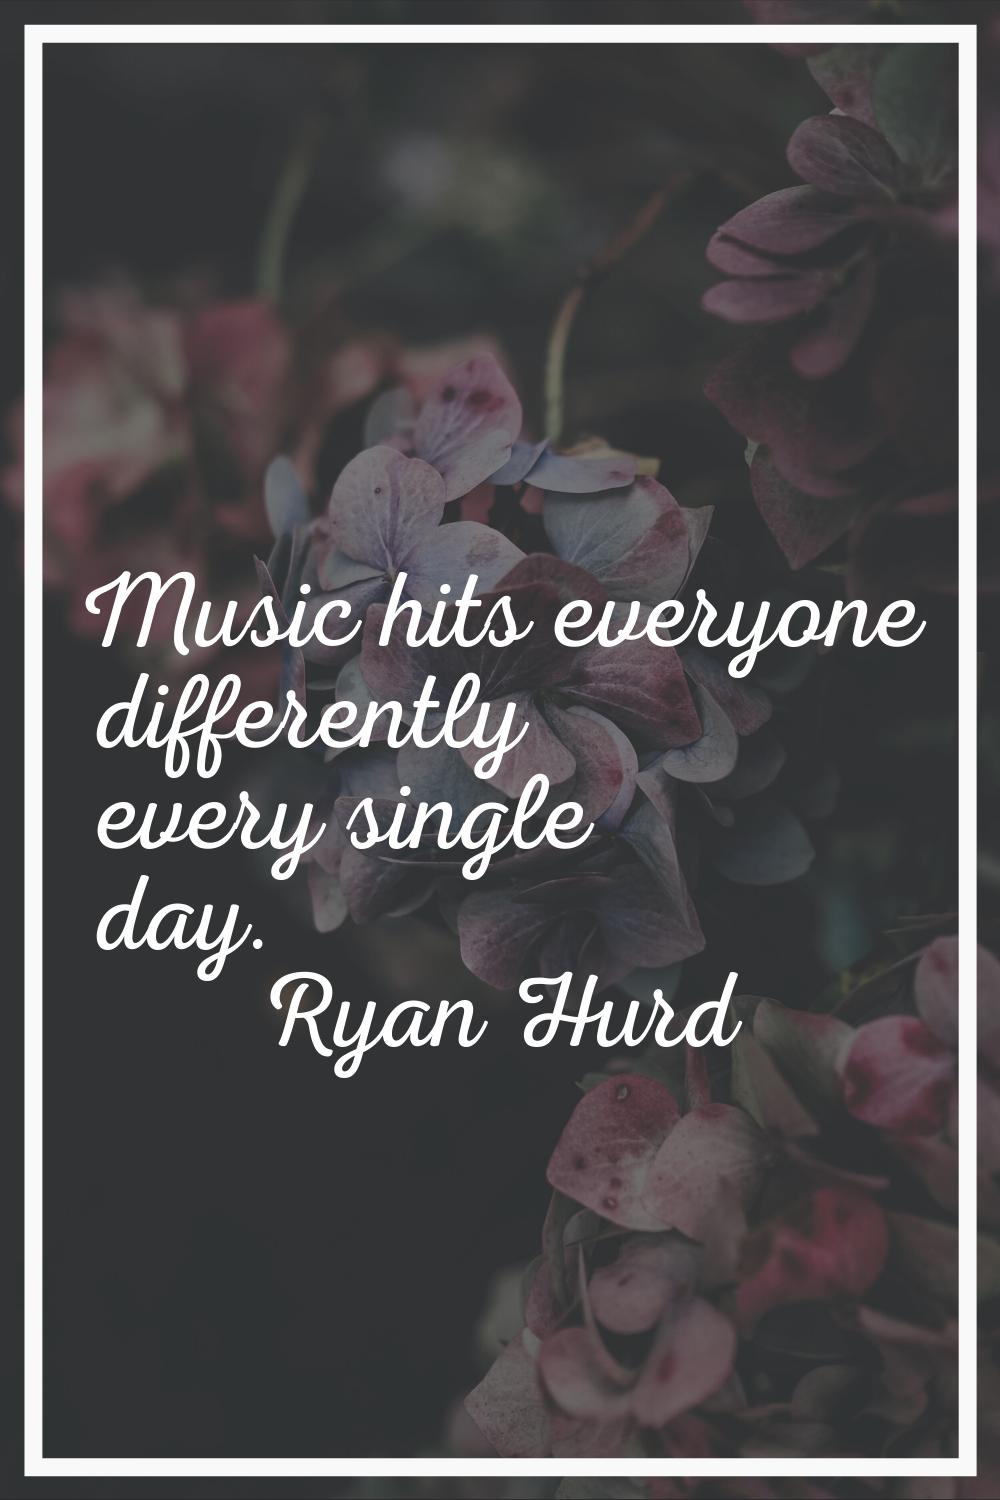 Music hits everyone differently every single day.